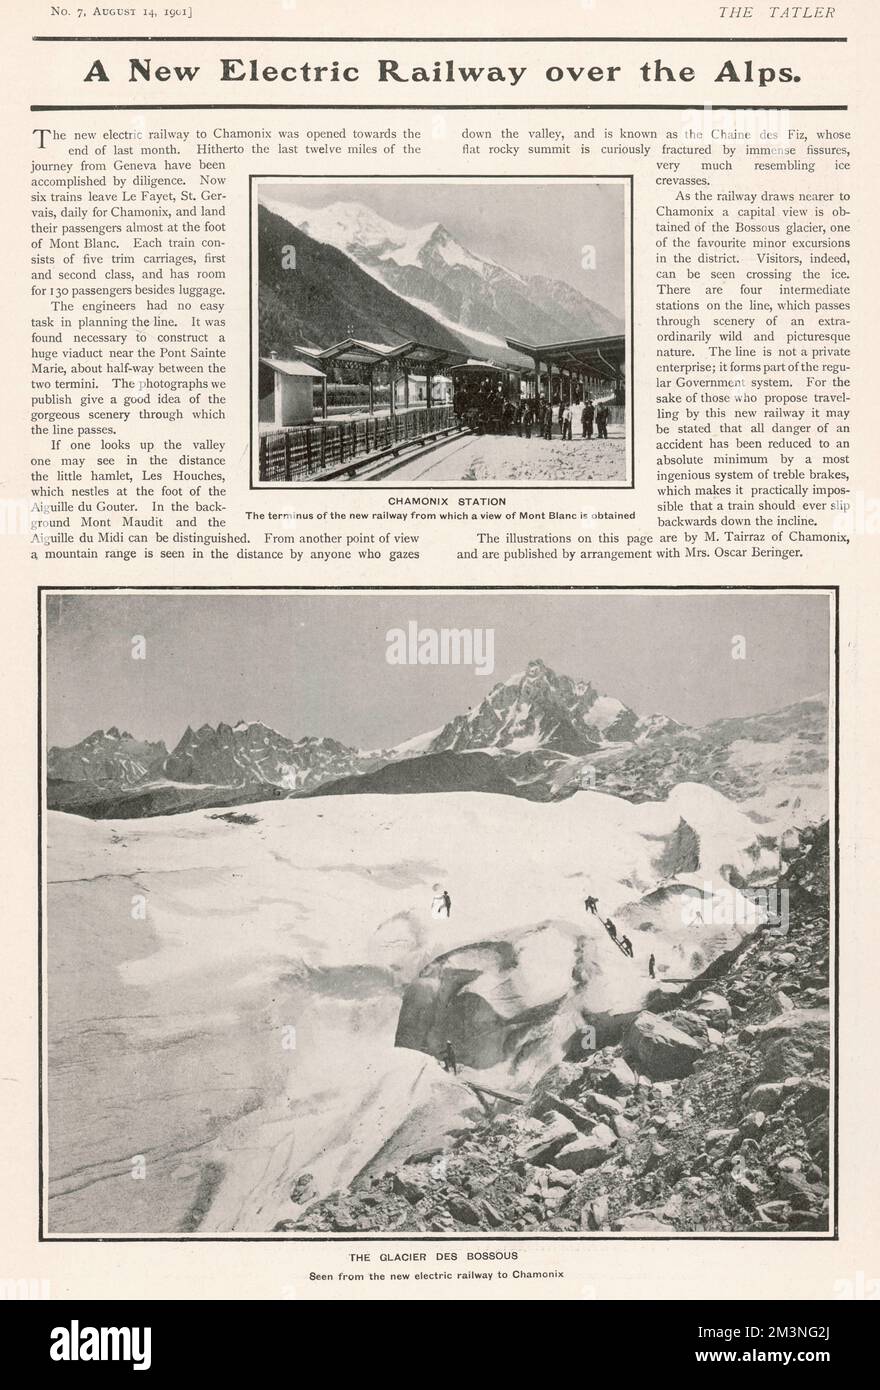 The new electric railway to Chamonix which opened in July 1901. The photographs show the beautiful scenery through which the line passes.     Date: 1901 Stock Photo